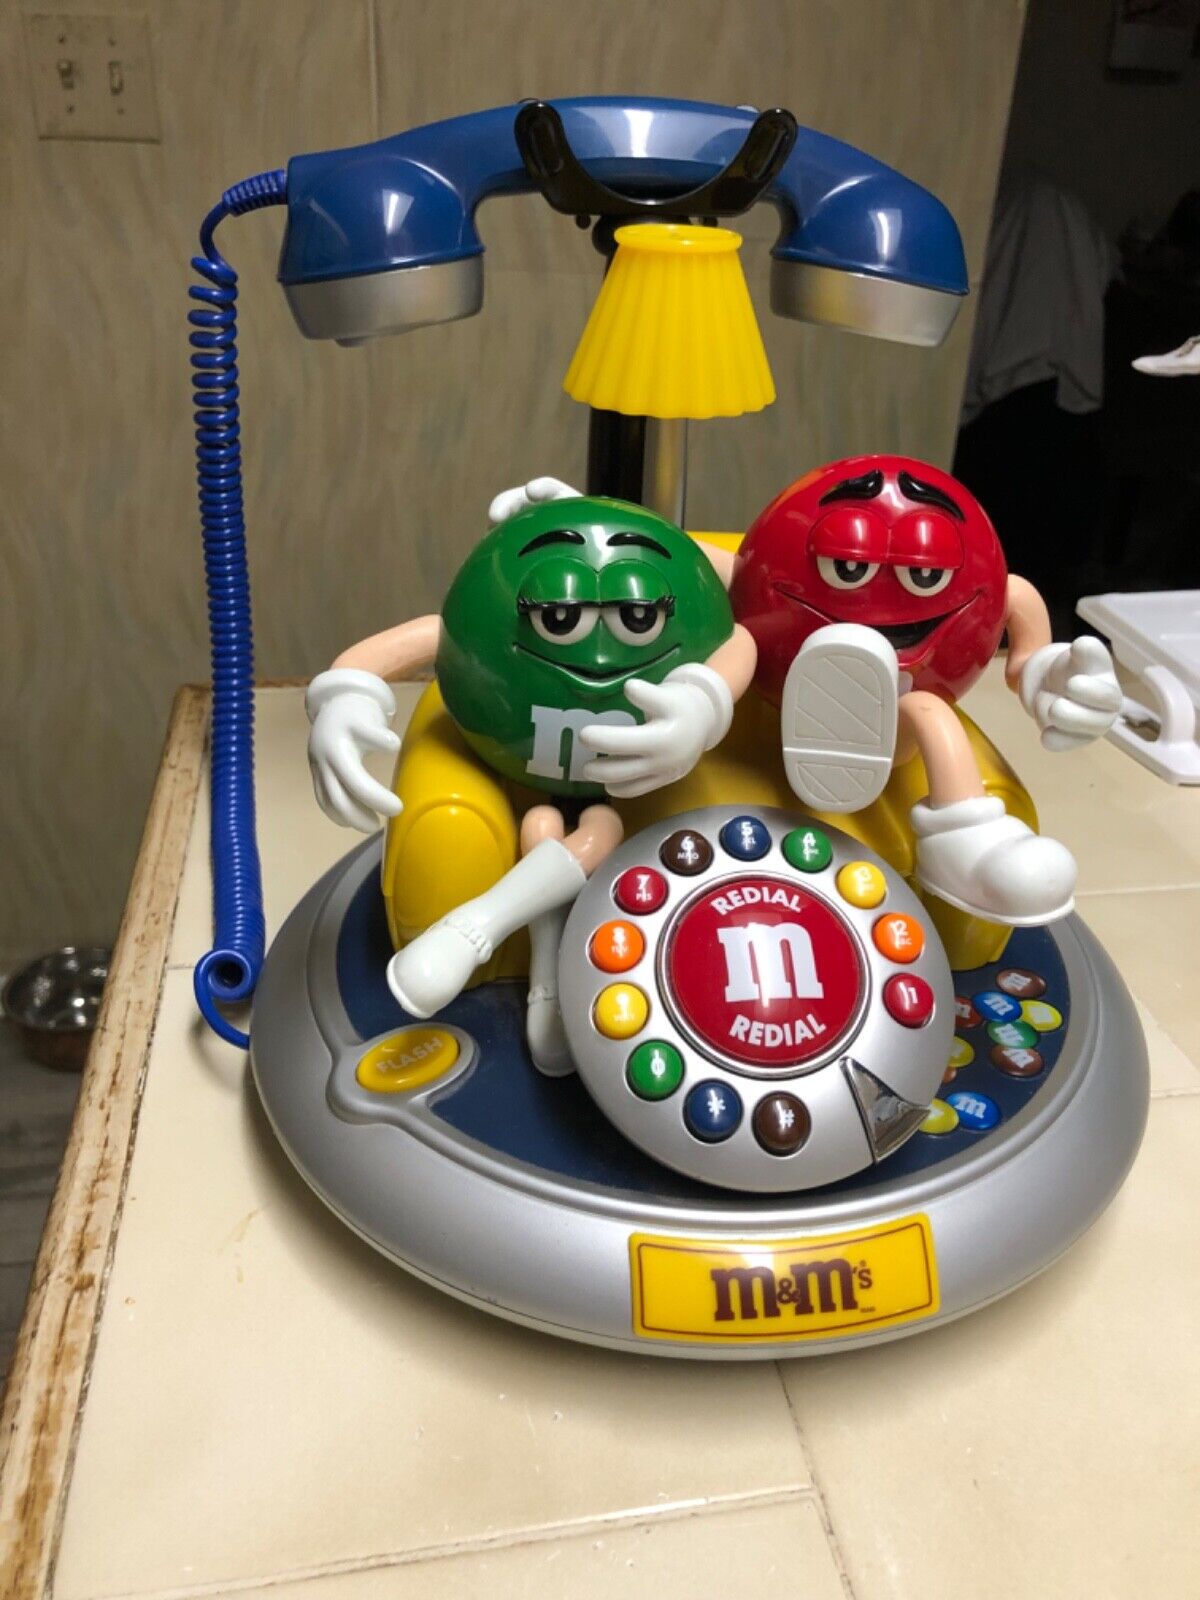 An antique M&Ms vintage phone, Perfect for that M&M collector. Would look great